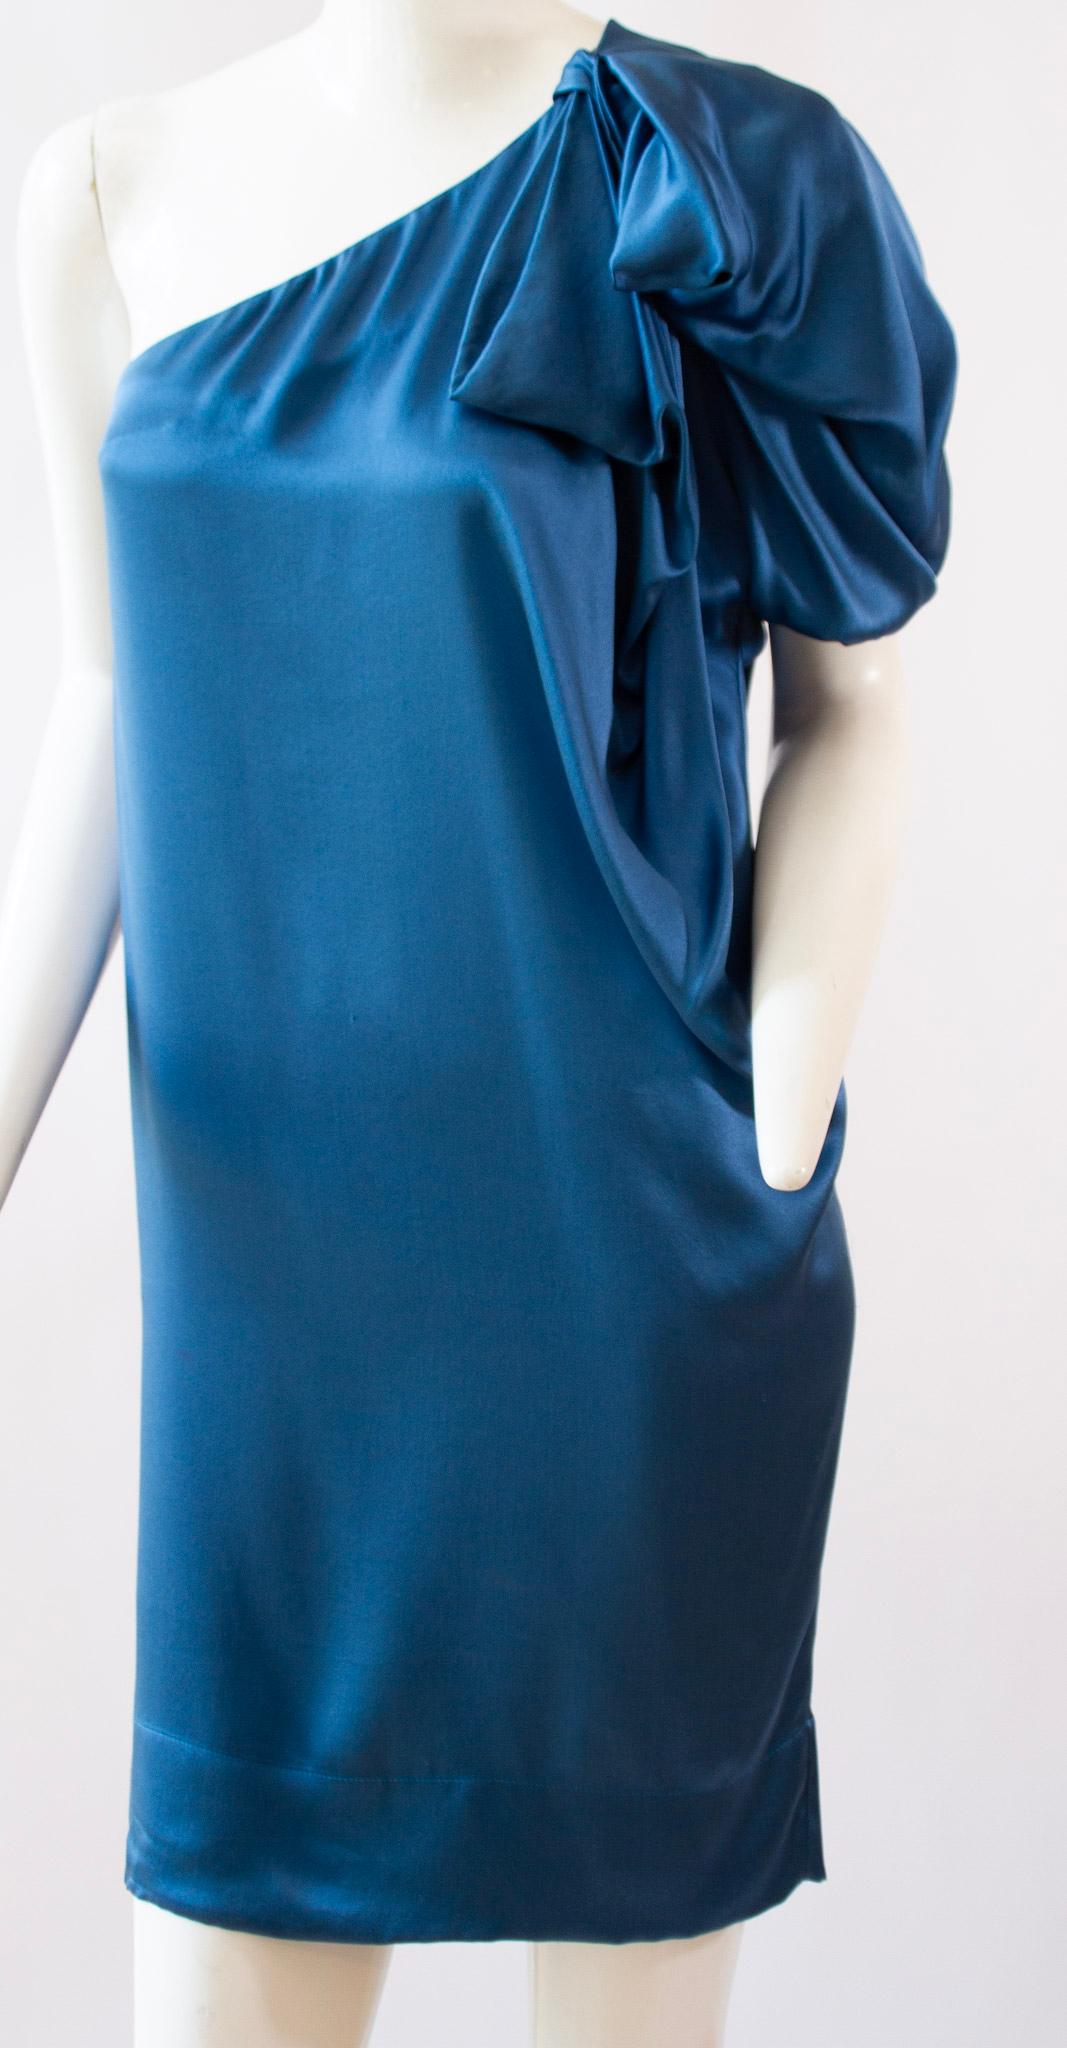 Azure blue silk dress from Stella McCartney. Bow detail and draping at shoulder. Sack style narrowing hemline. 

Size 34

100% Silk